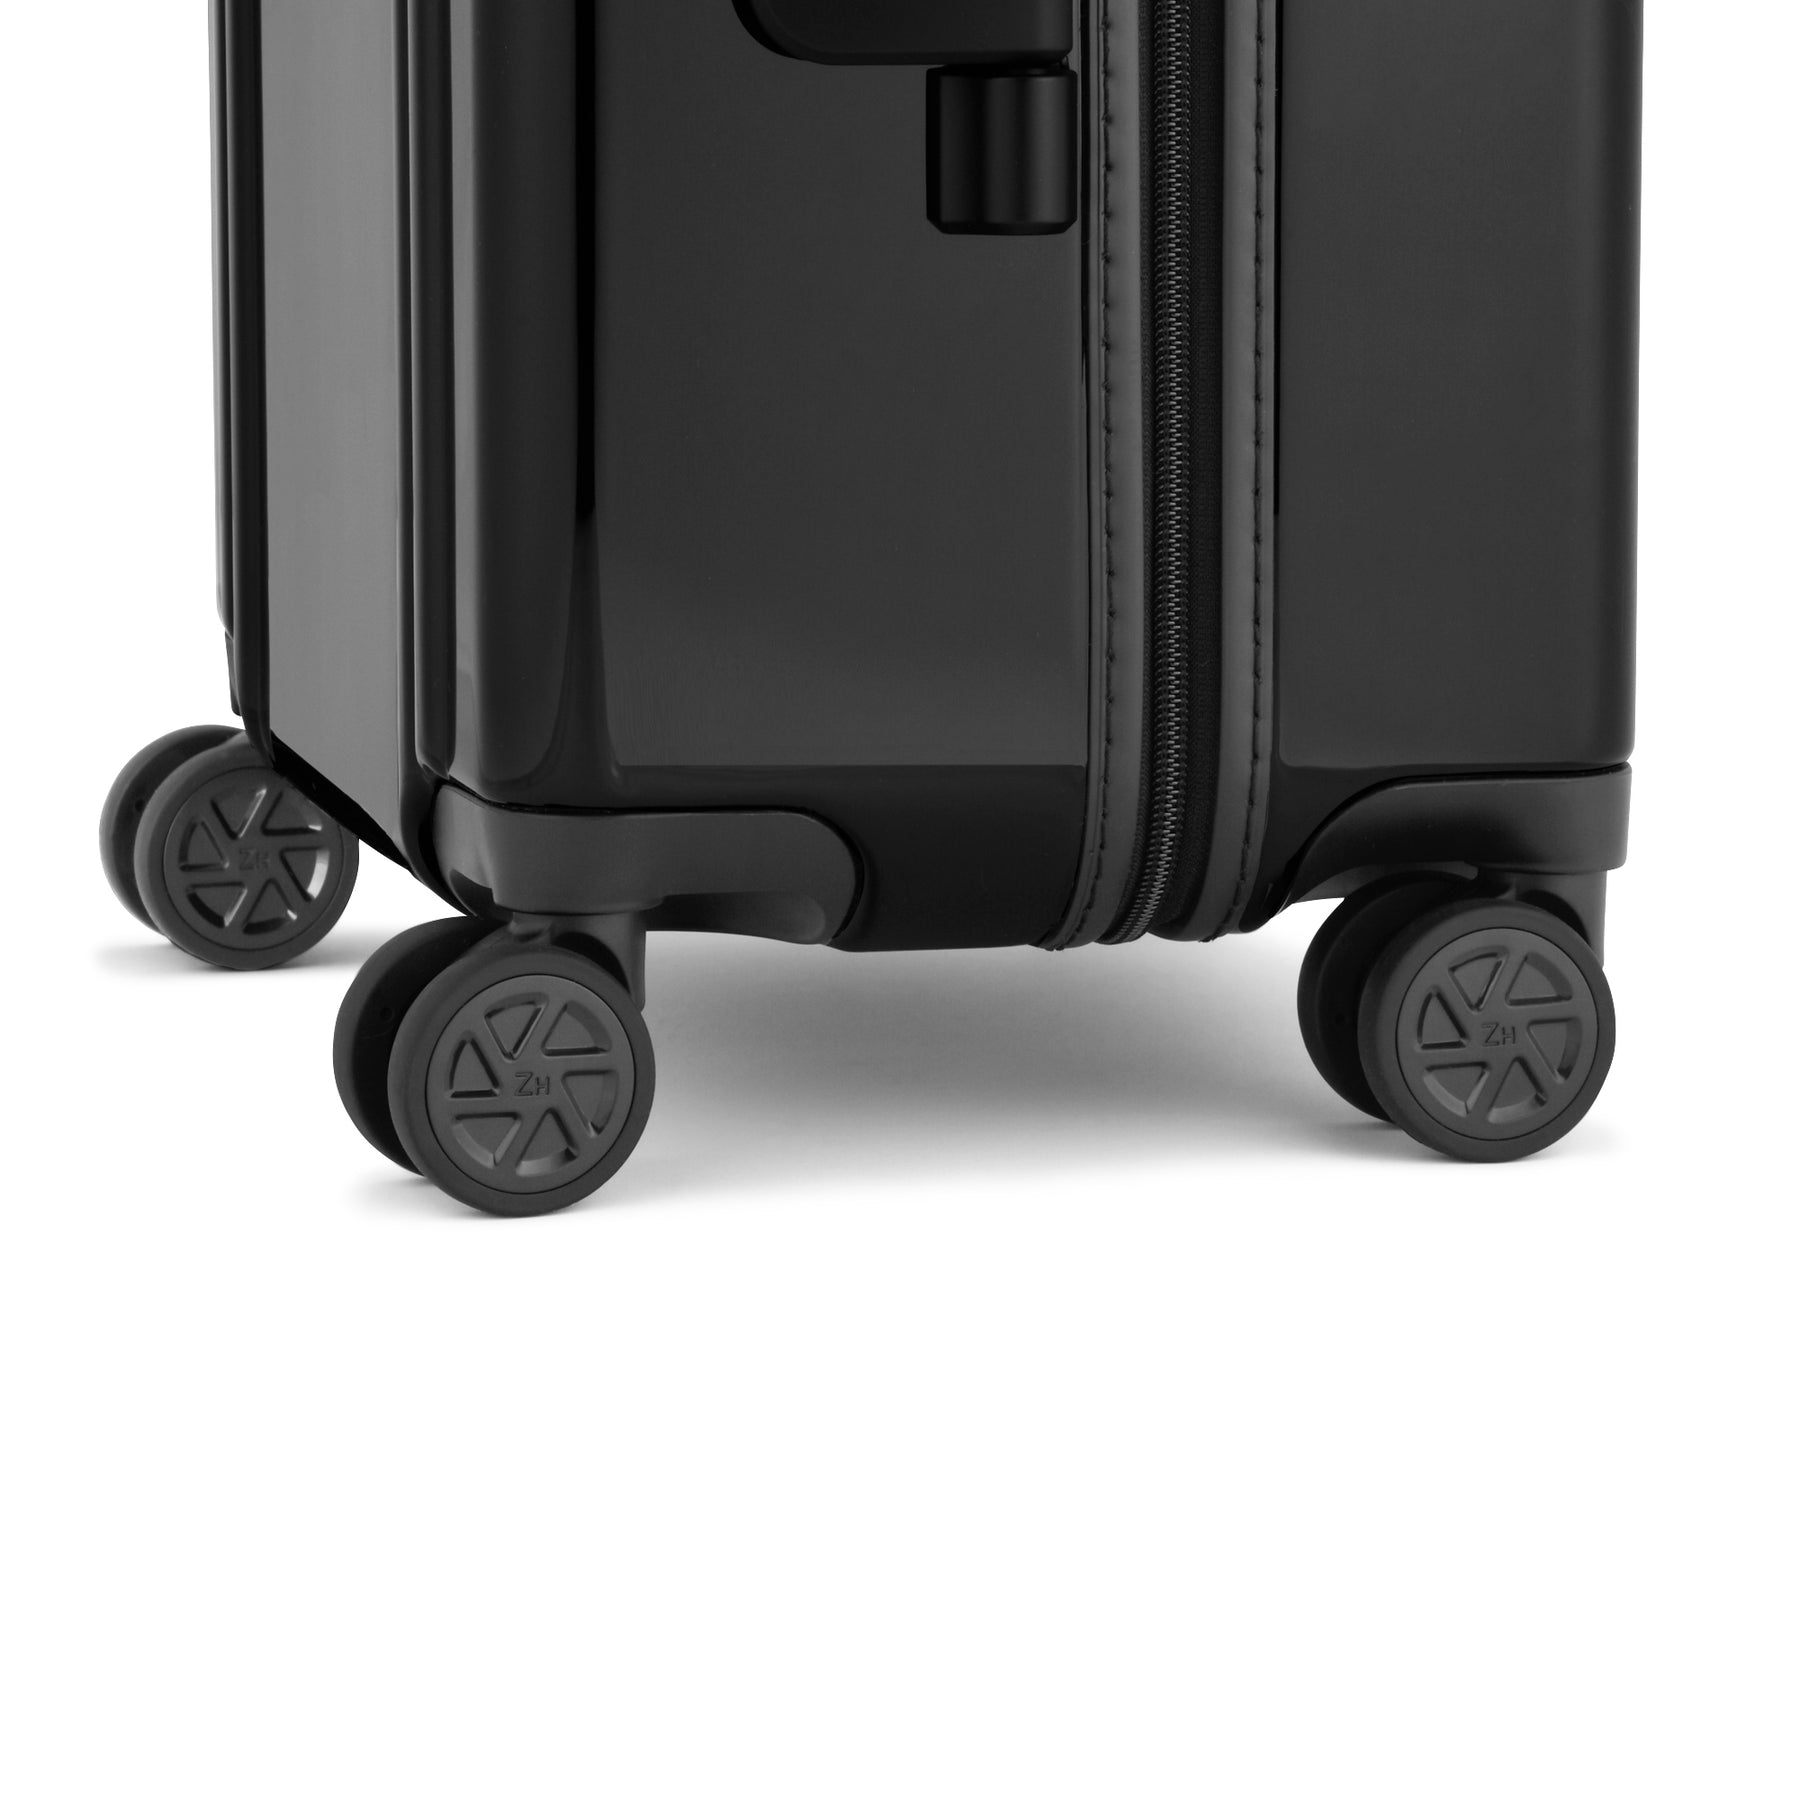 Classic Lightweight 3.0 For F.C.R.B. | Carry-On Travel Case 32L 81391